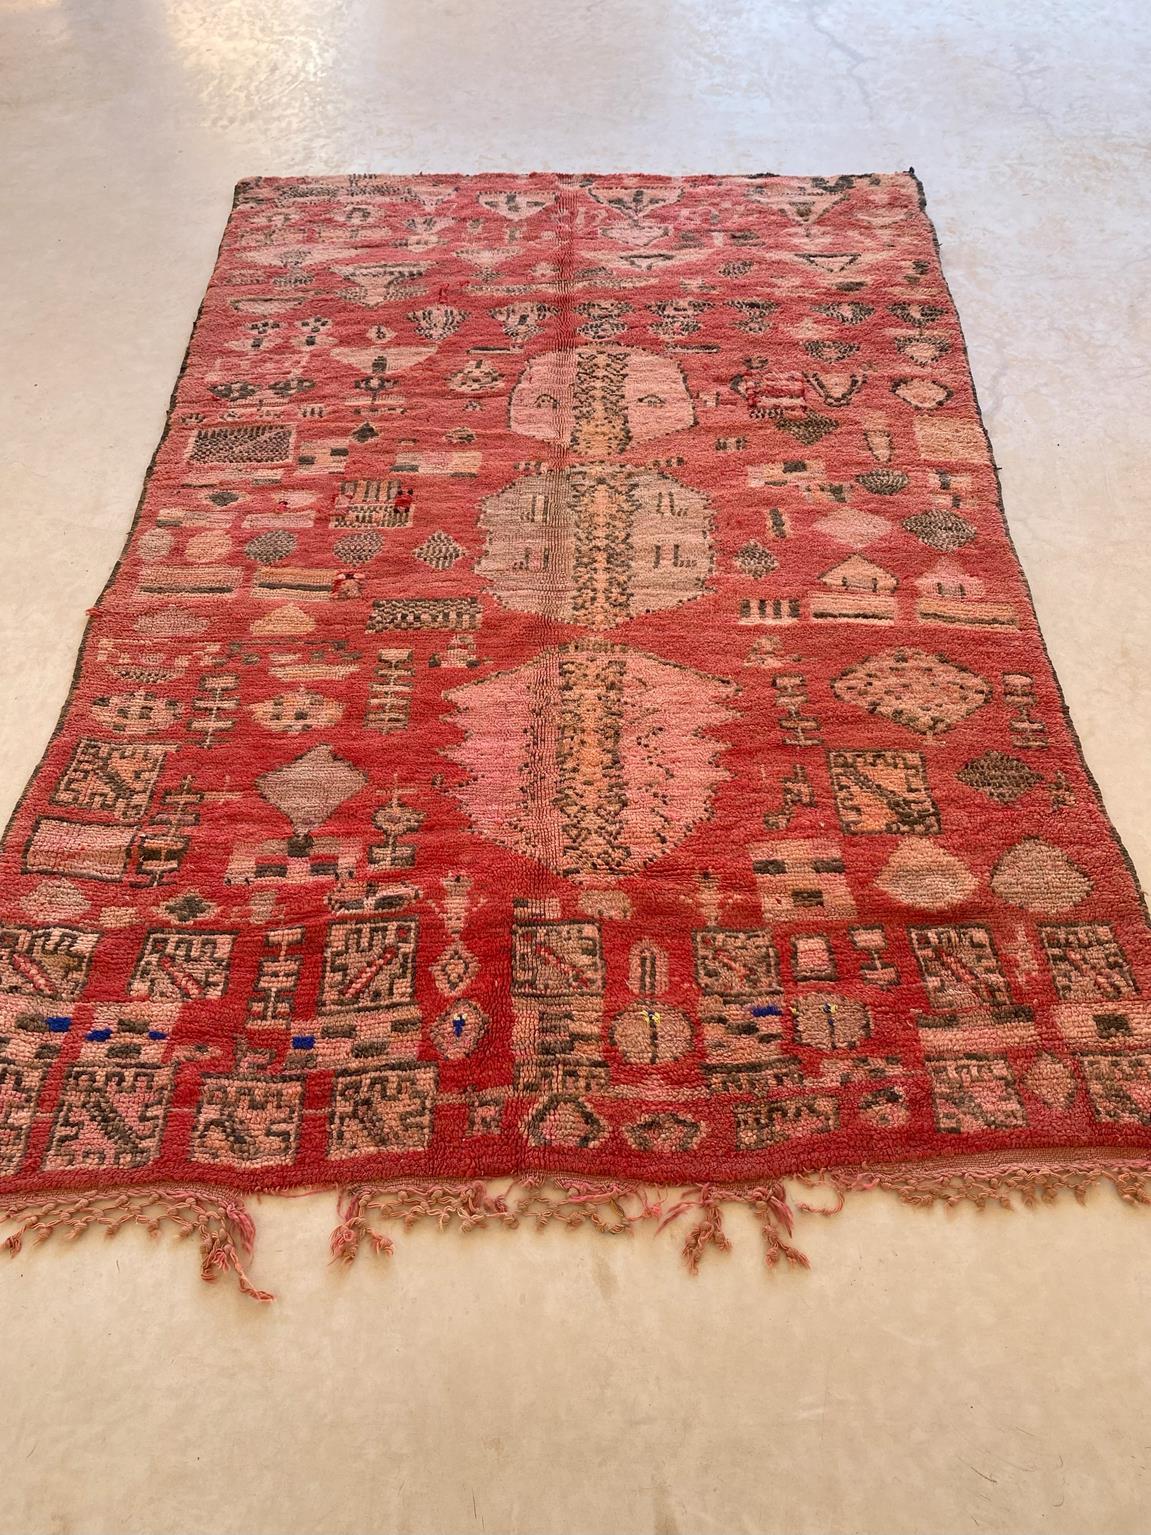 Hand-Woven Collector Moroccan Rehamna rug - Red/pink - 5.8x8.6feet / 177x264cm For Sale